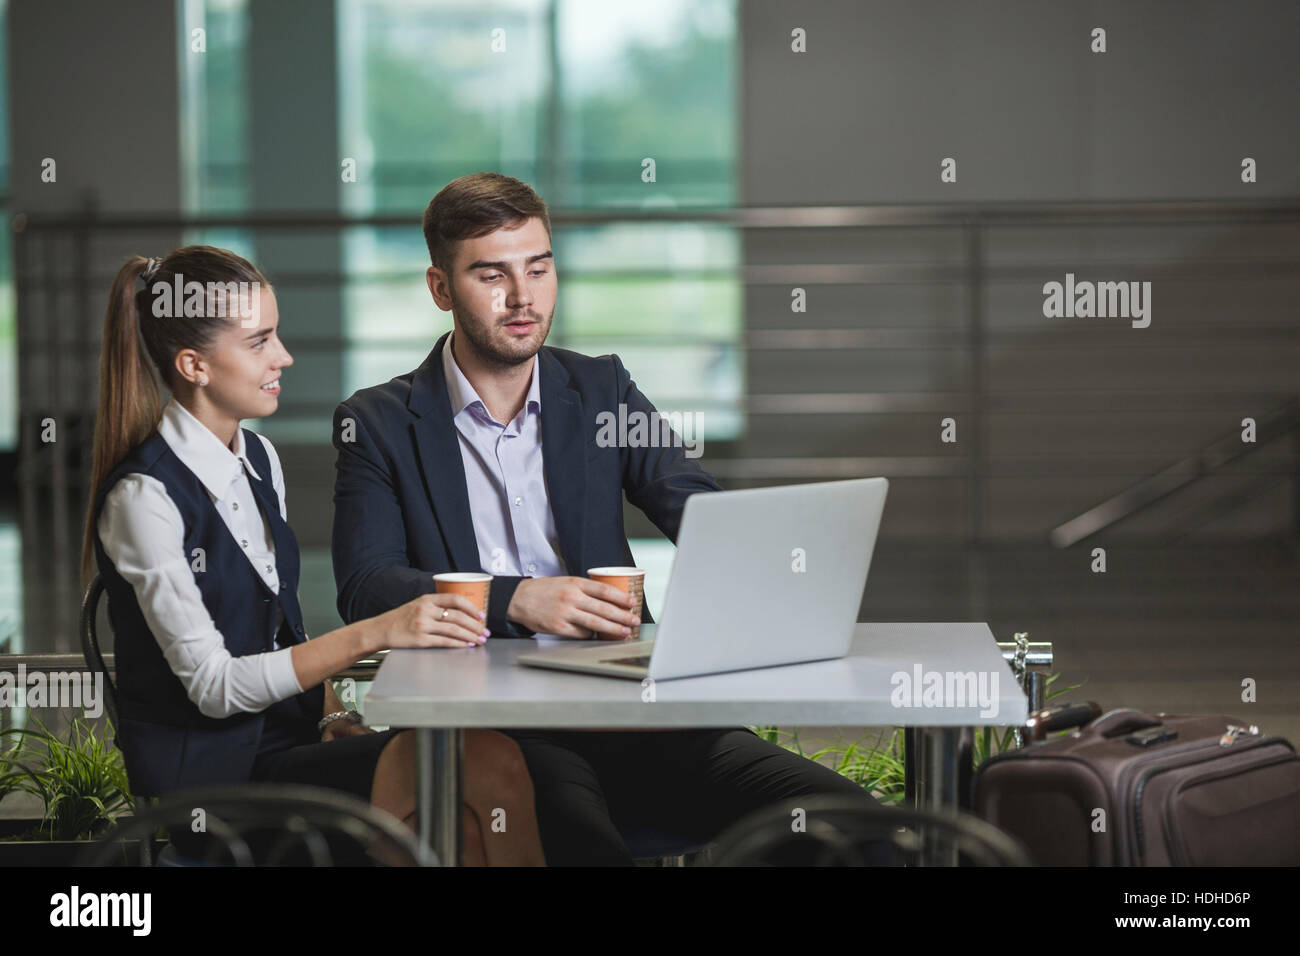 Young businessman with female colleague using laptop at table in airport Stock Photo